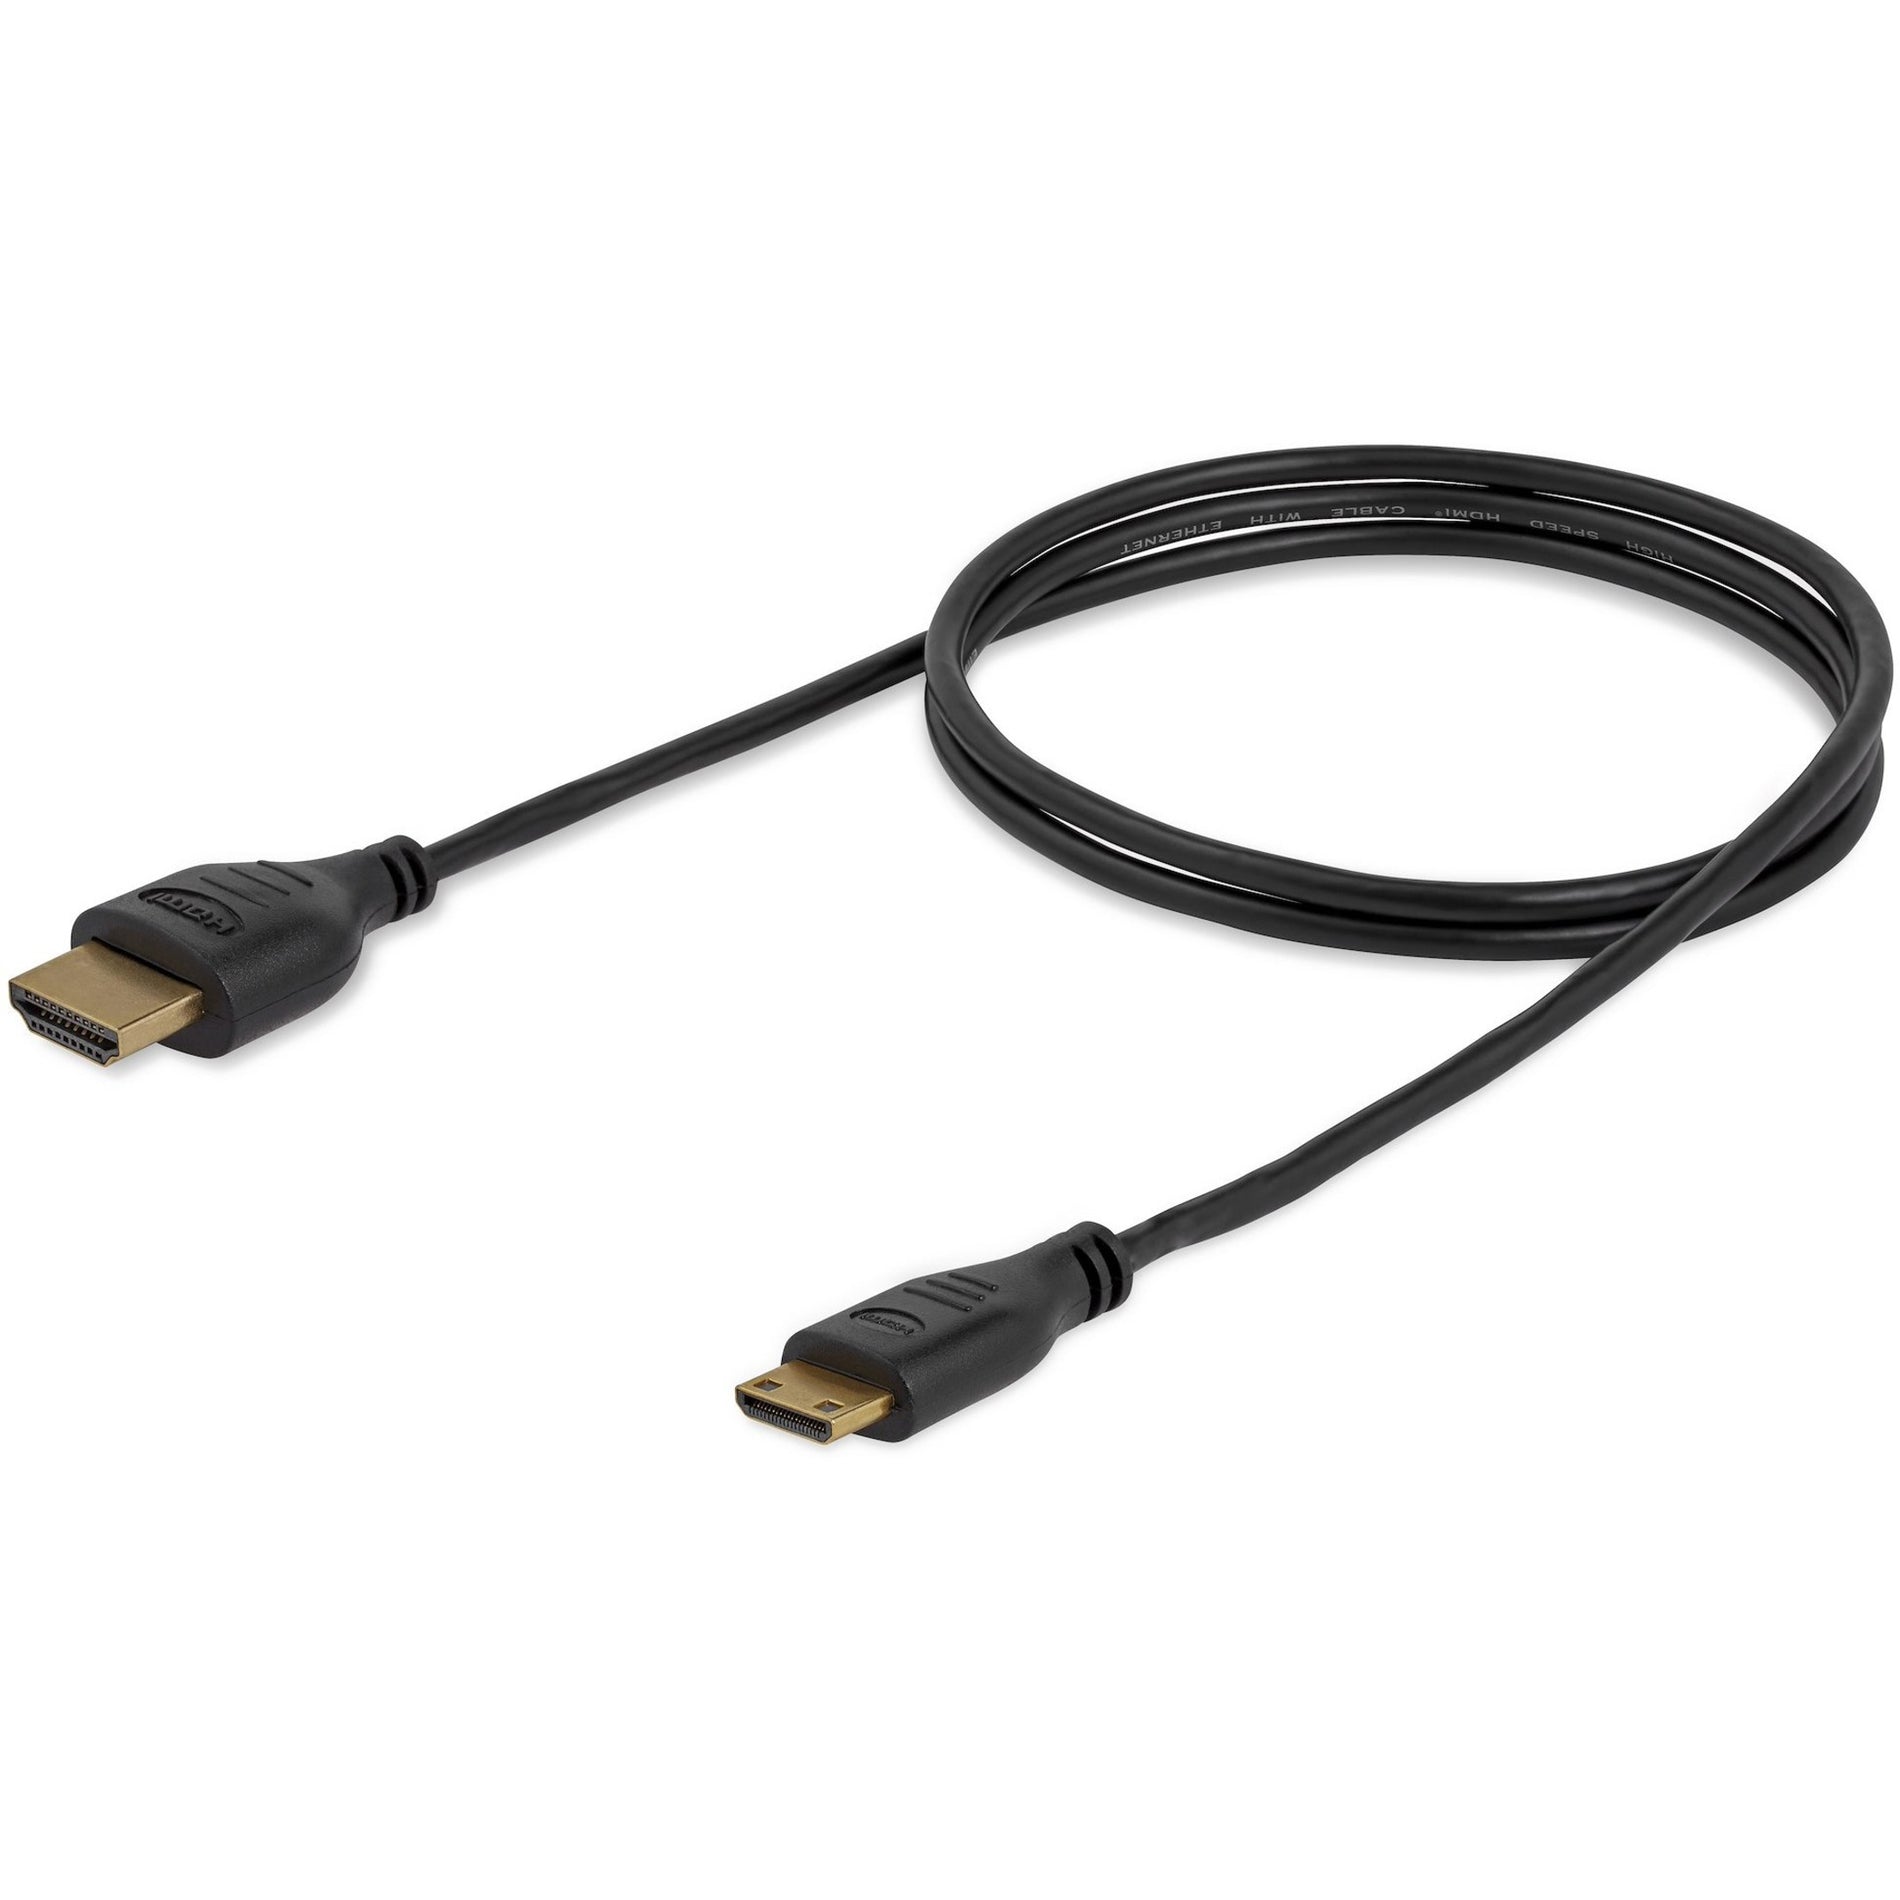 StarTech.com HDMIACMM3S 3 ft Slim HDMI High Speed with Ethernet Cable, HDMI to Mini HDMI